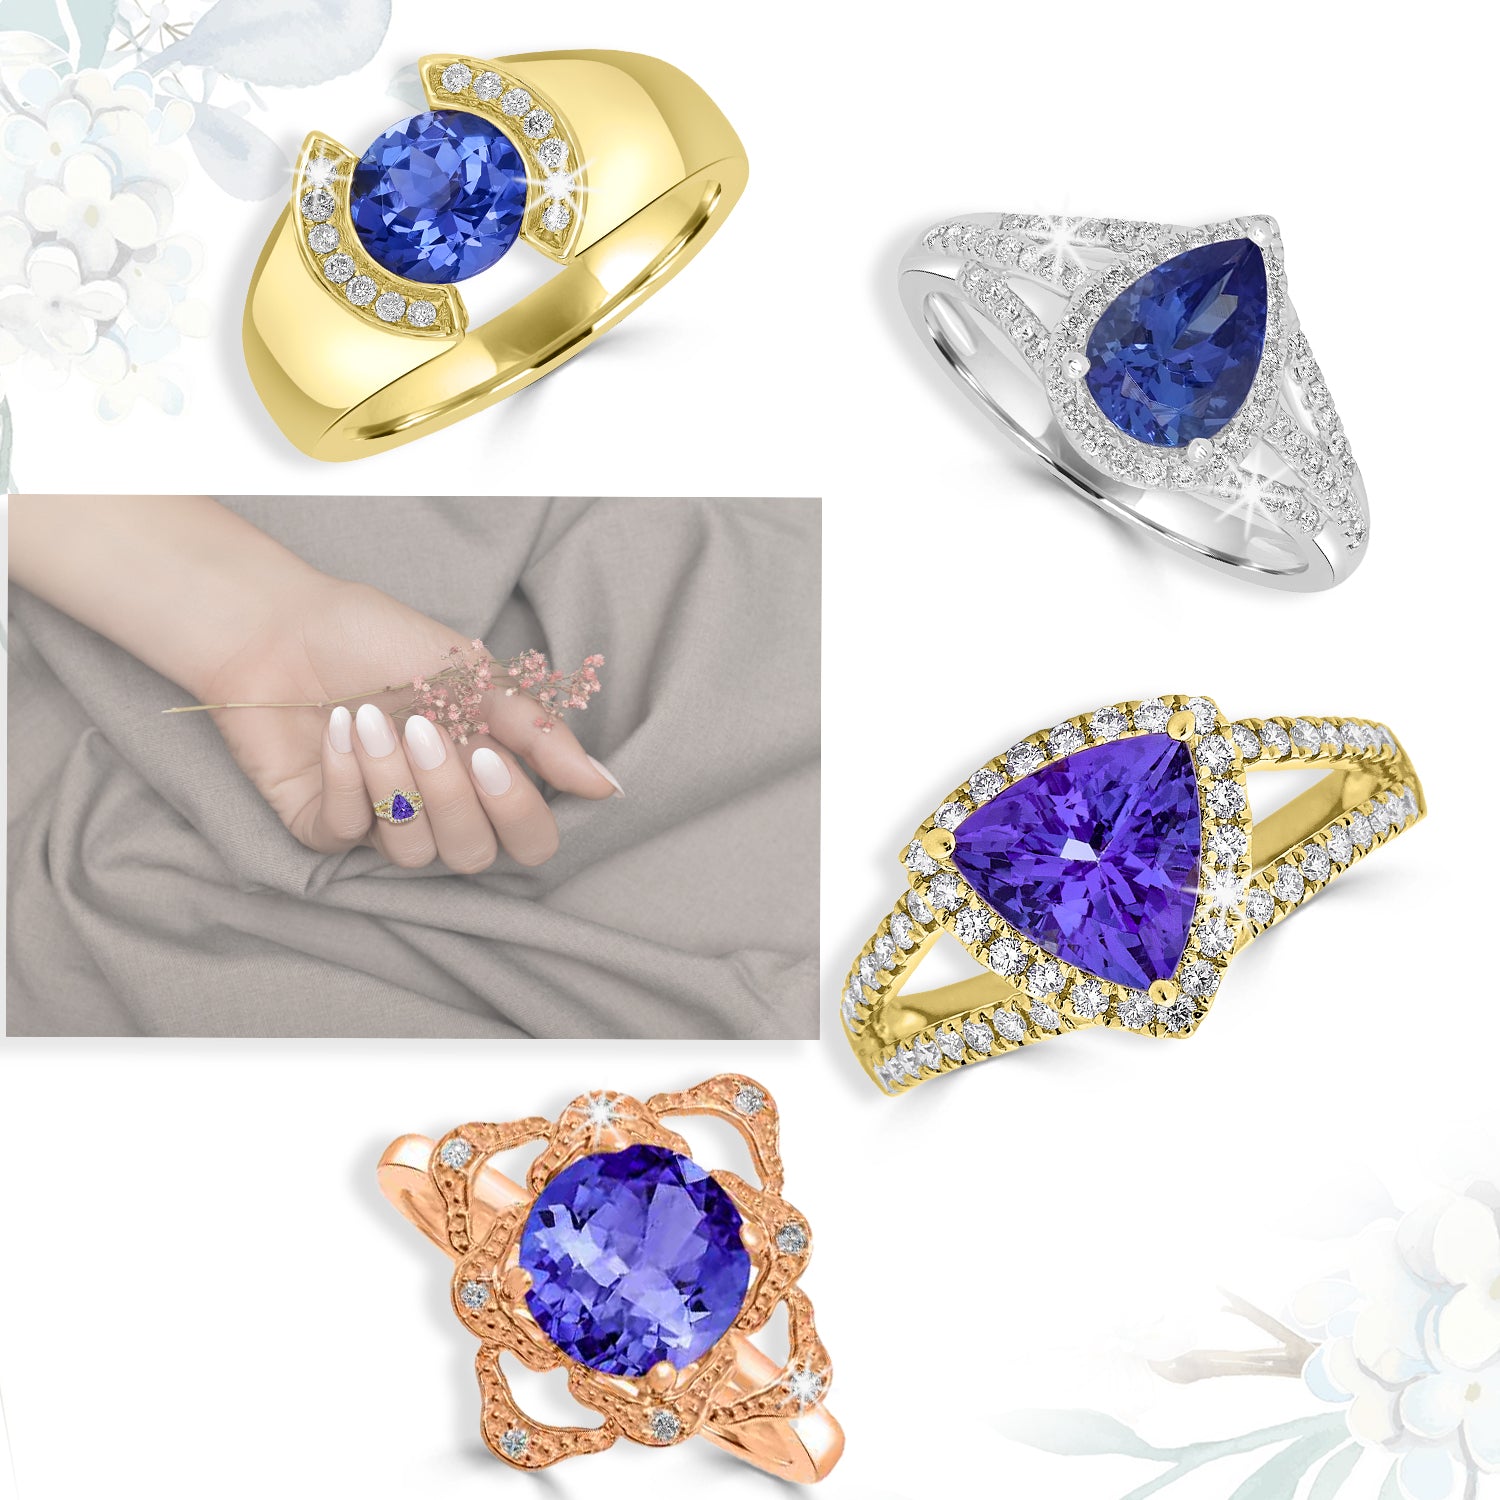 Tanzanite Statement Pieces: Bold Jewelry for a Confident You